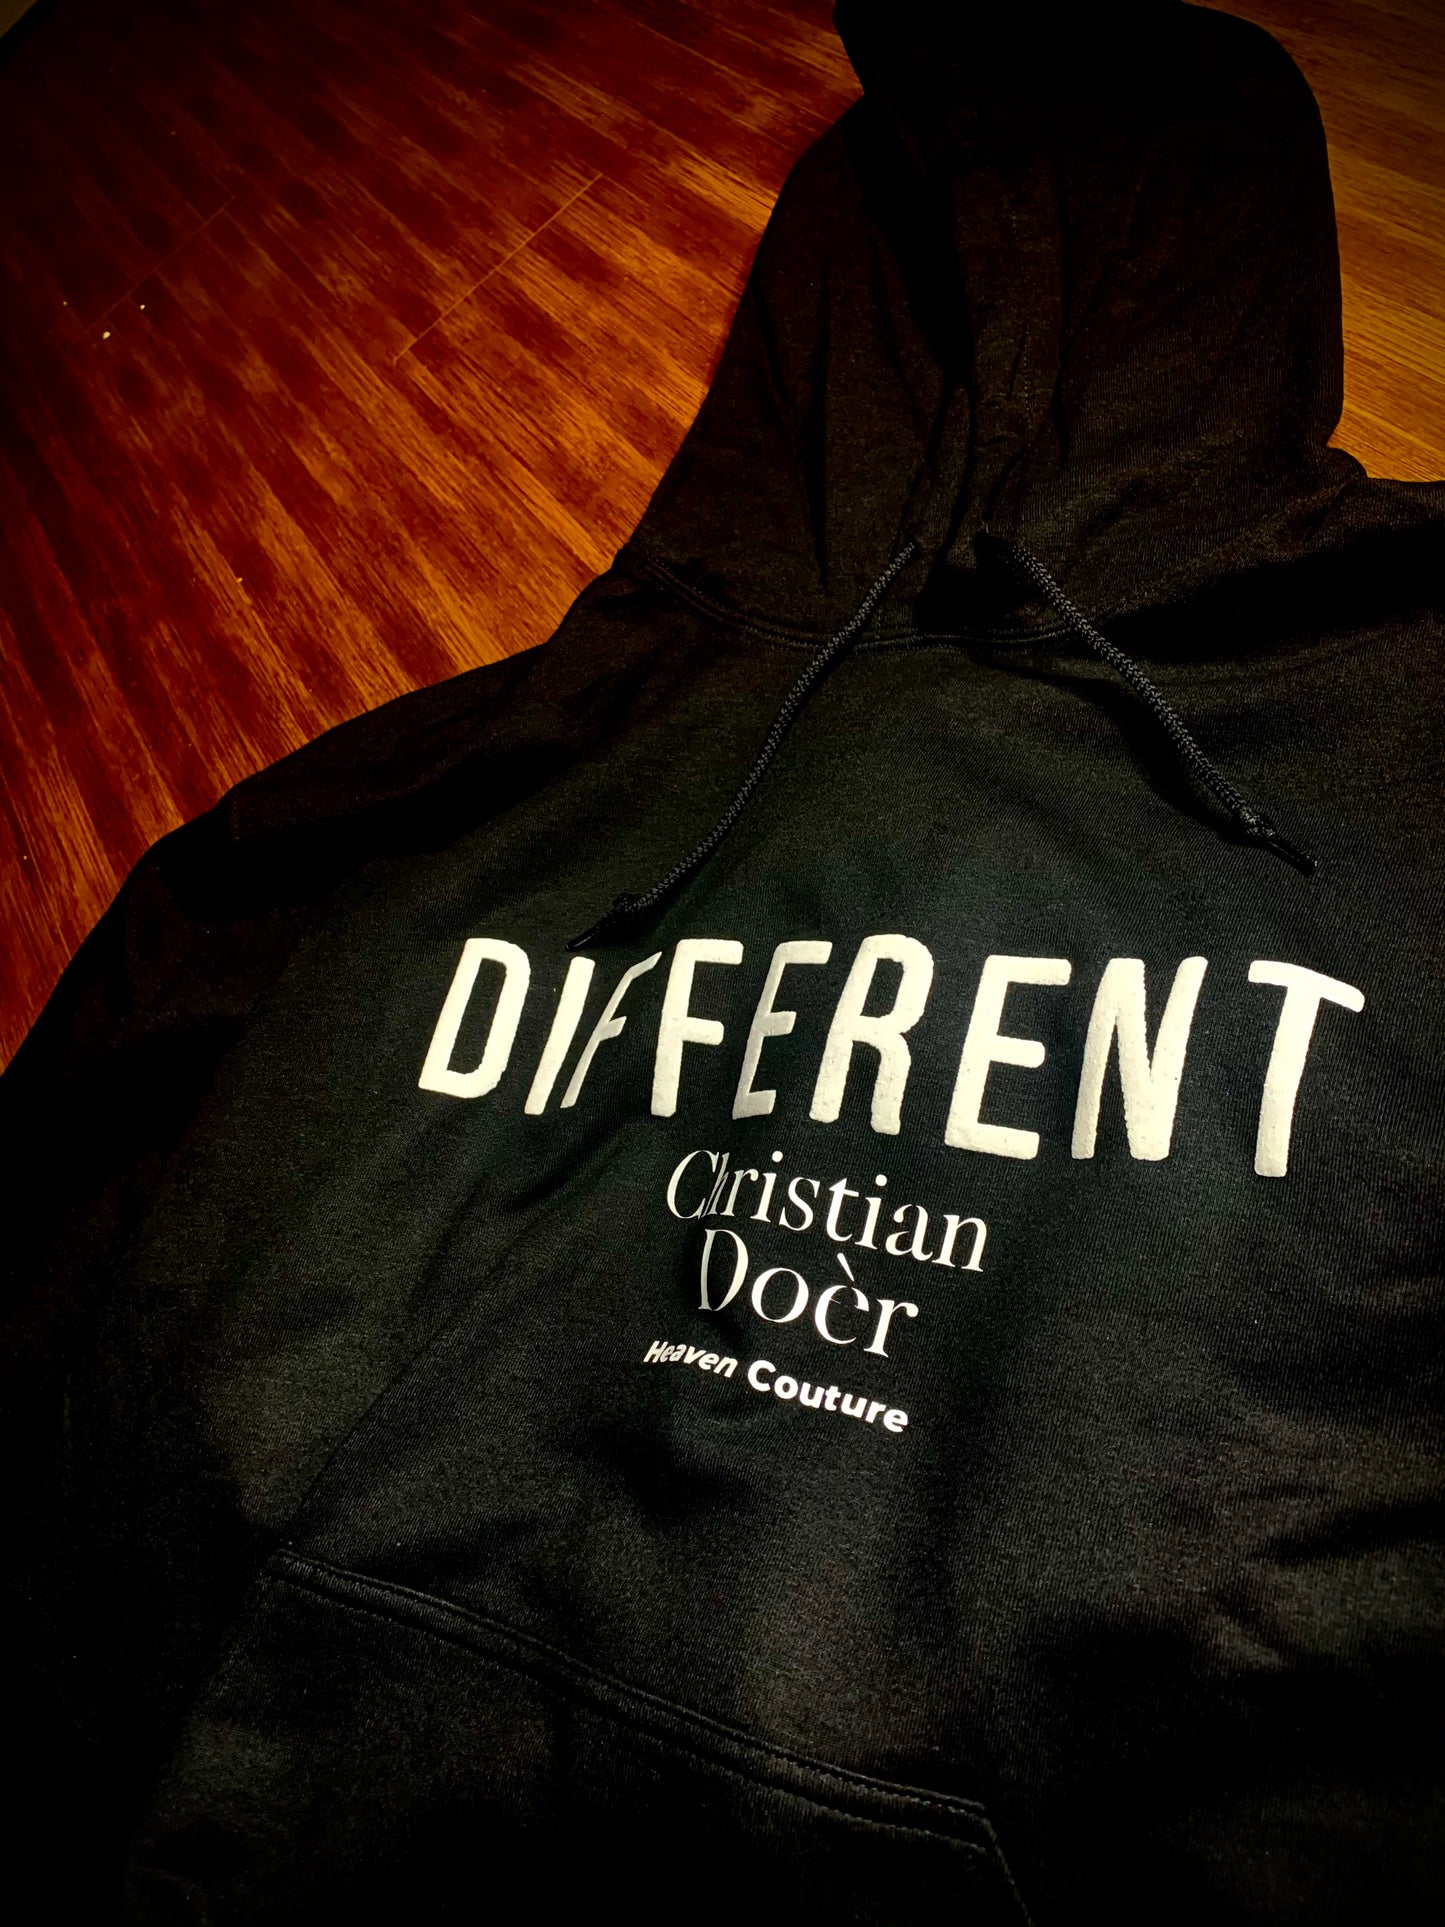 Christian Doèr - DIFFERENT COLLECTION - BOLD LOGO